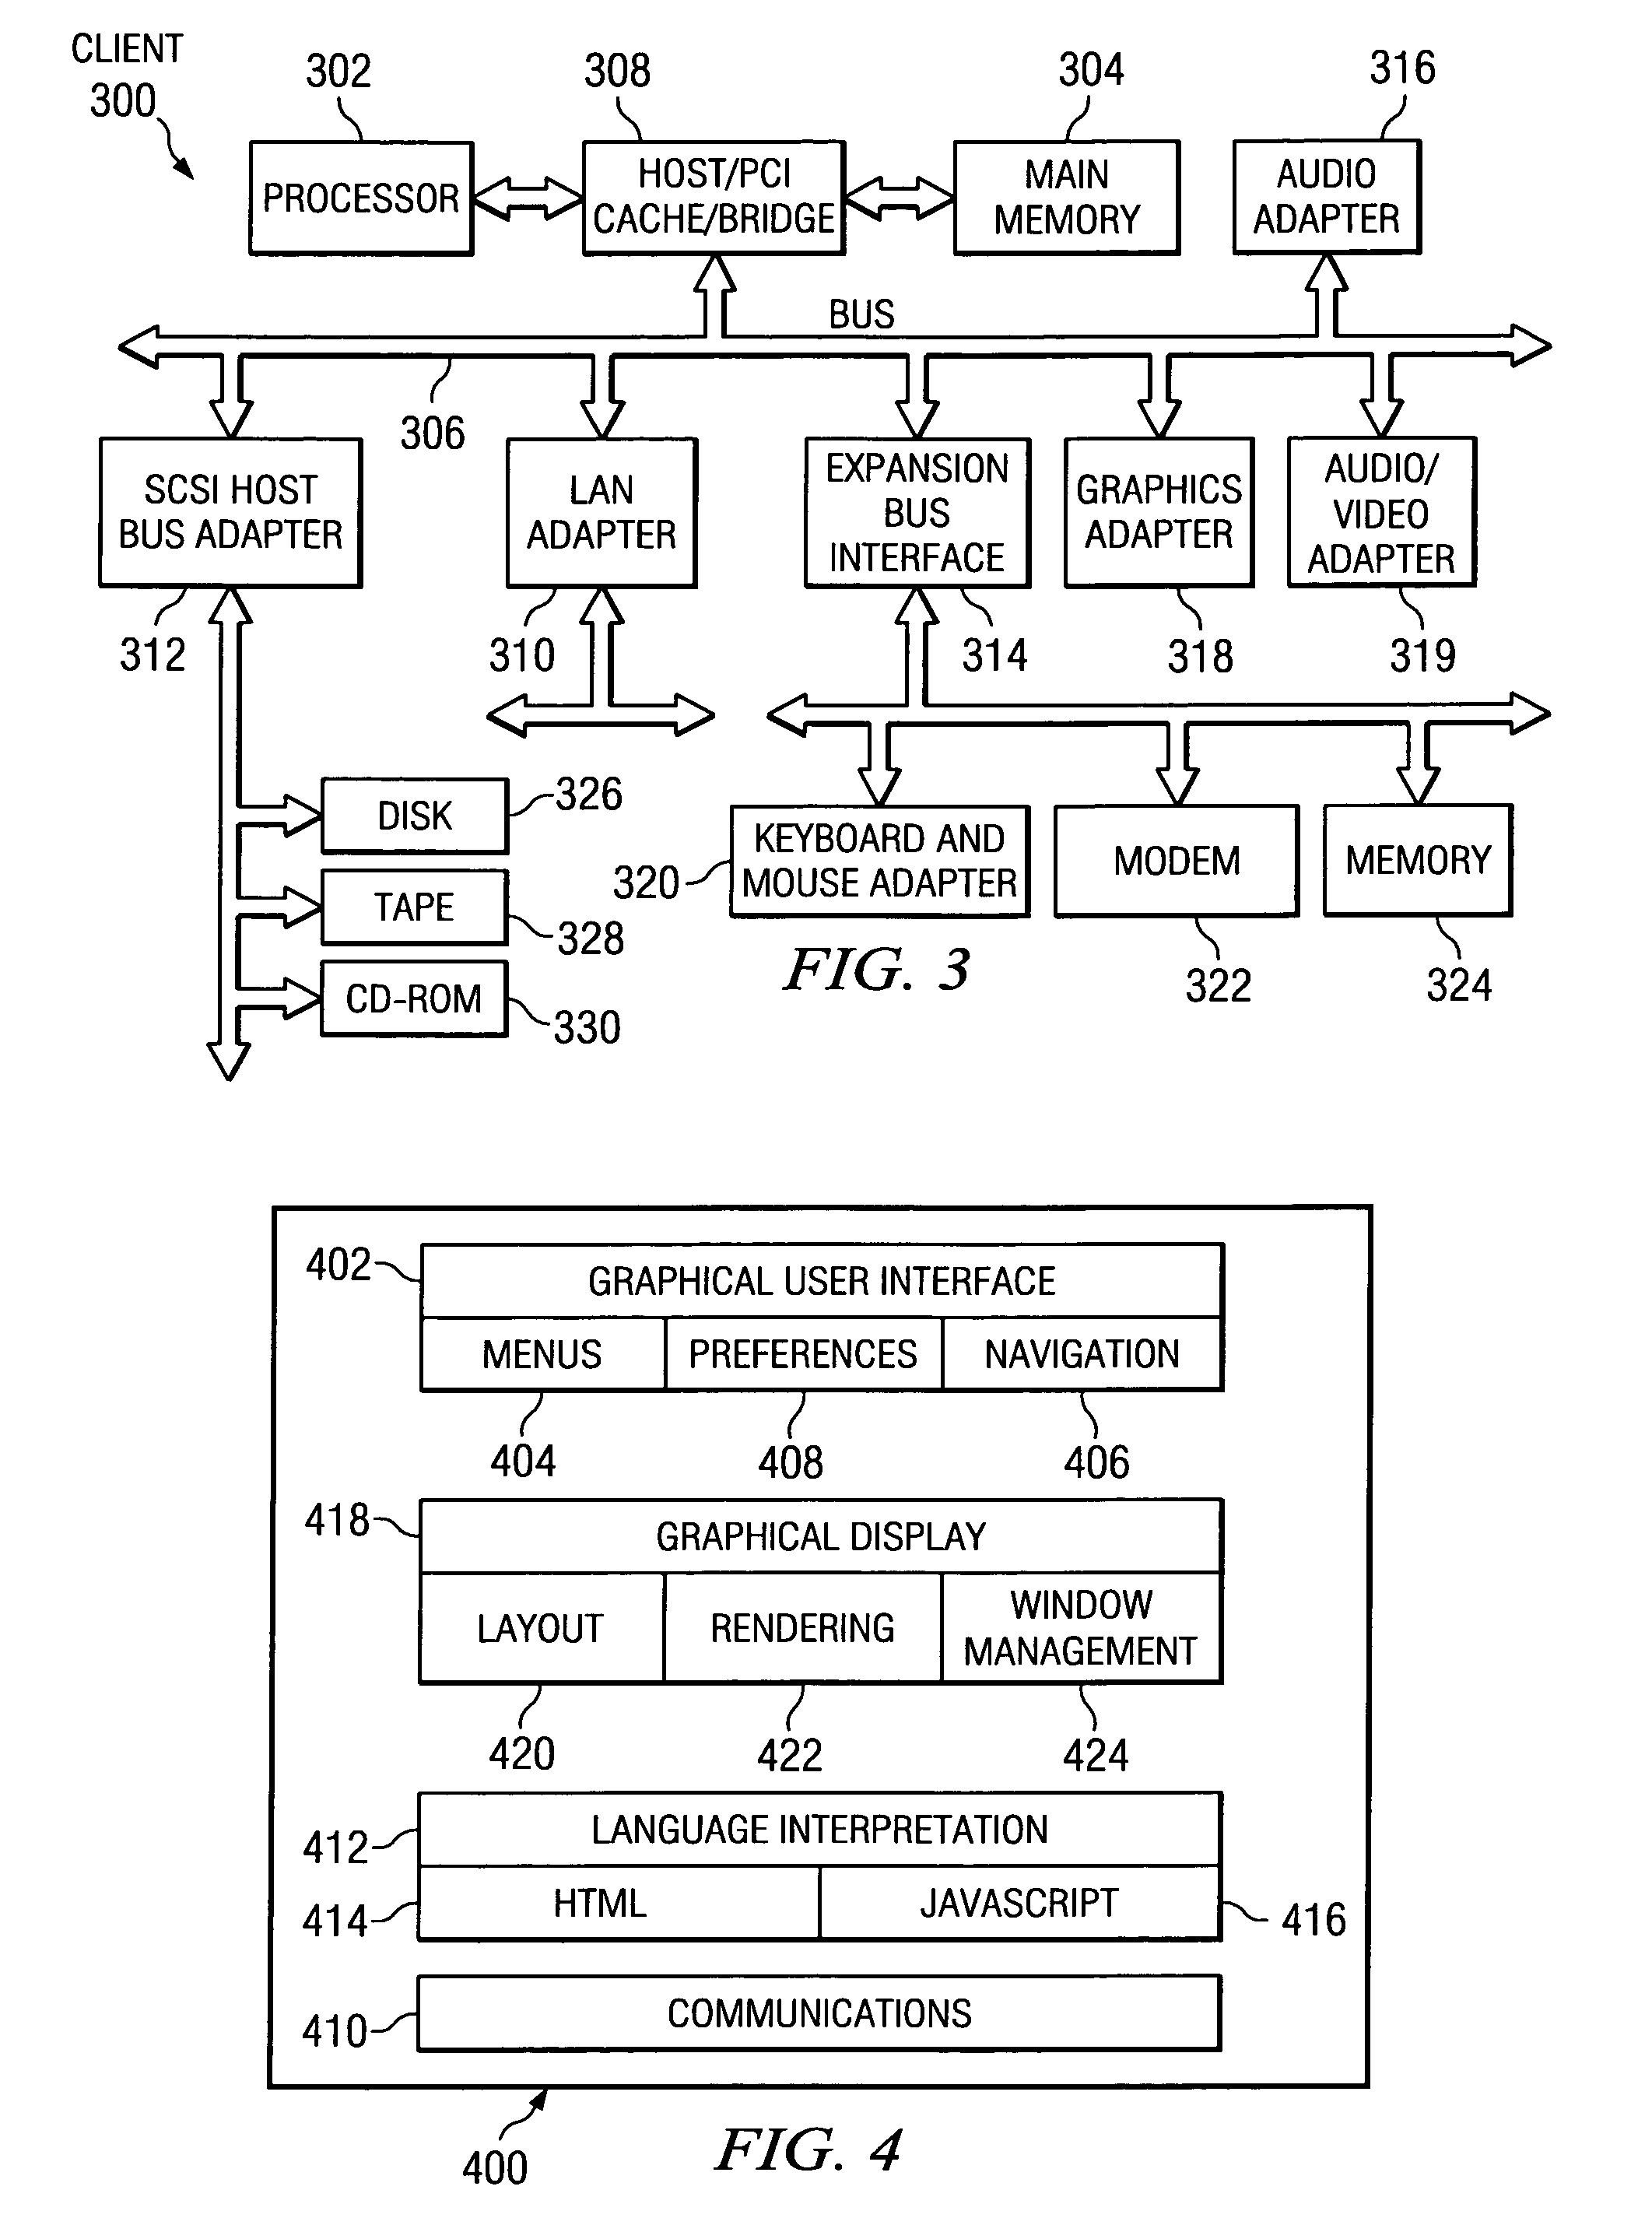 Method of displaying real-time service level performance, breach, and guaranteed uniformity with automatic alerts and proactive rebating for utility computing environment